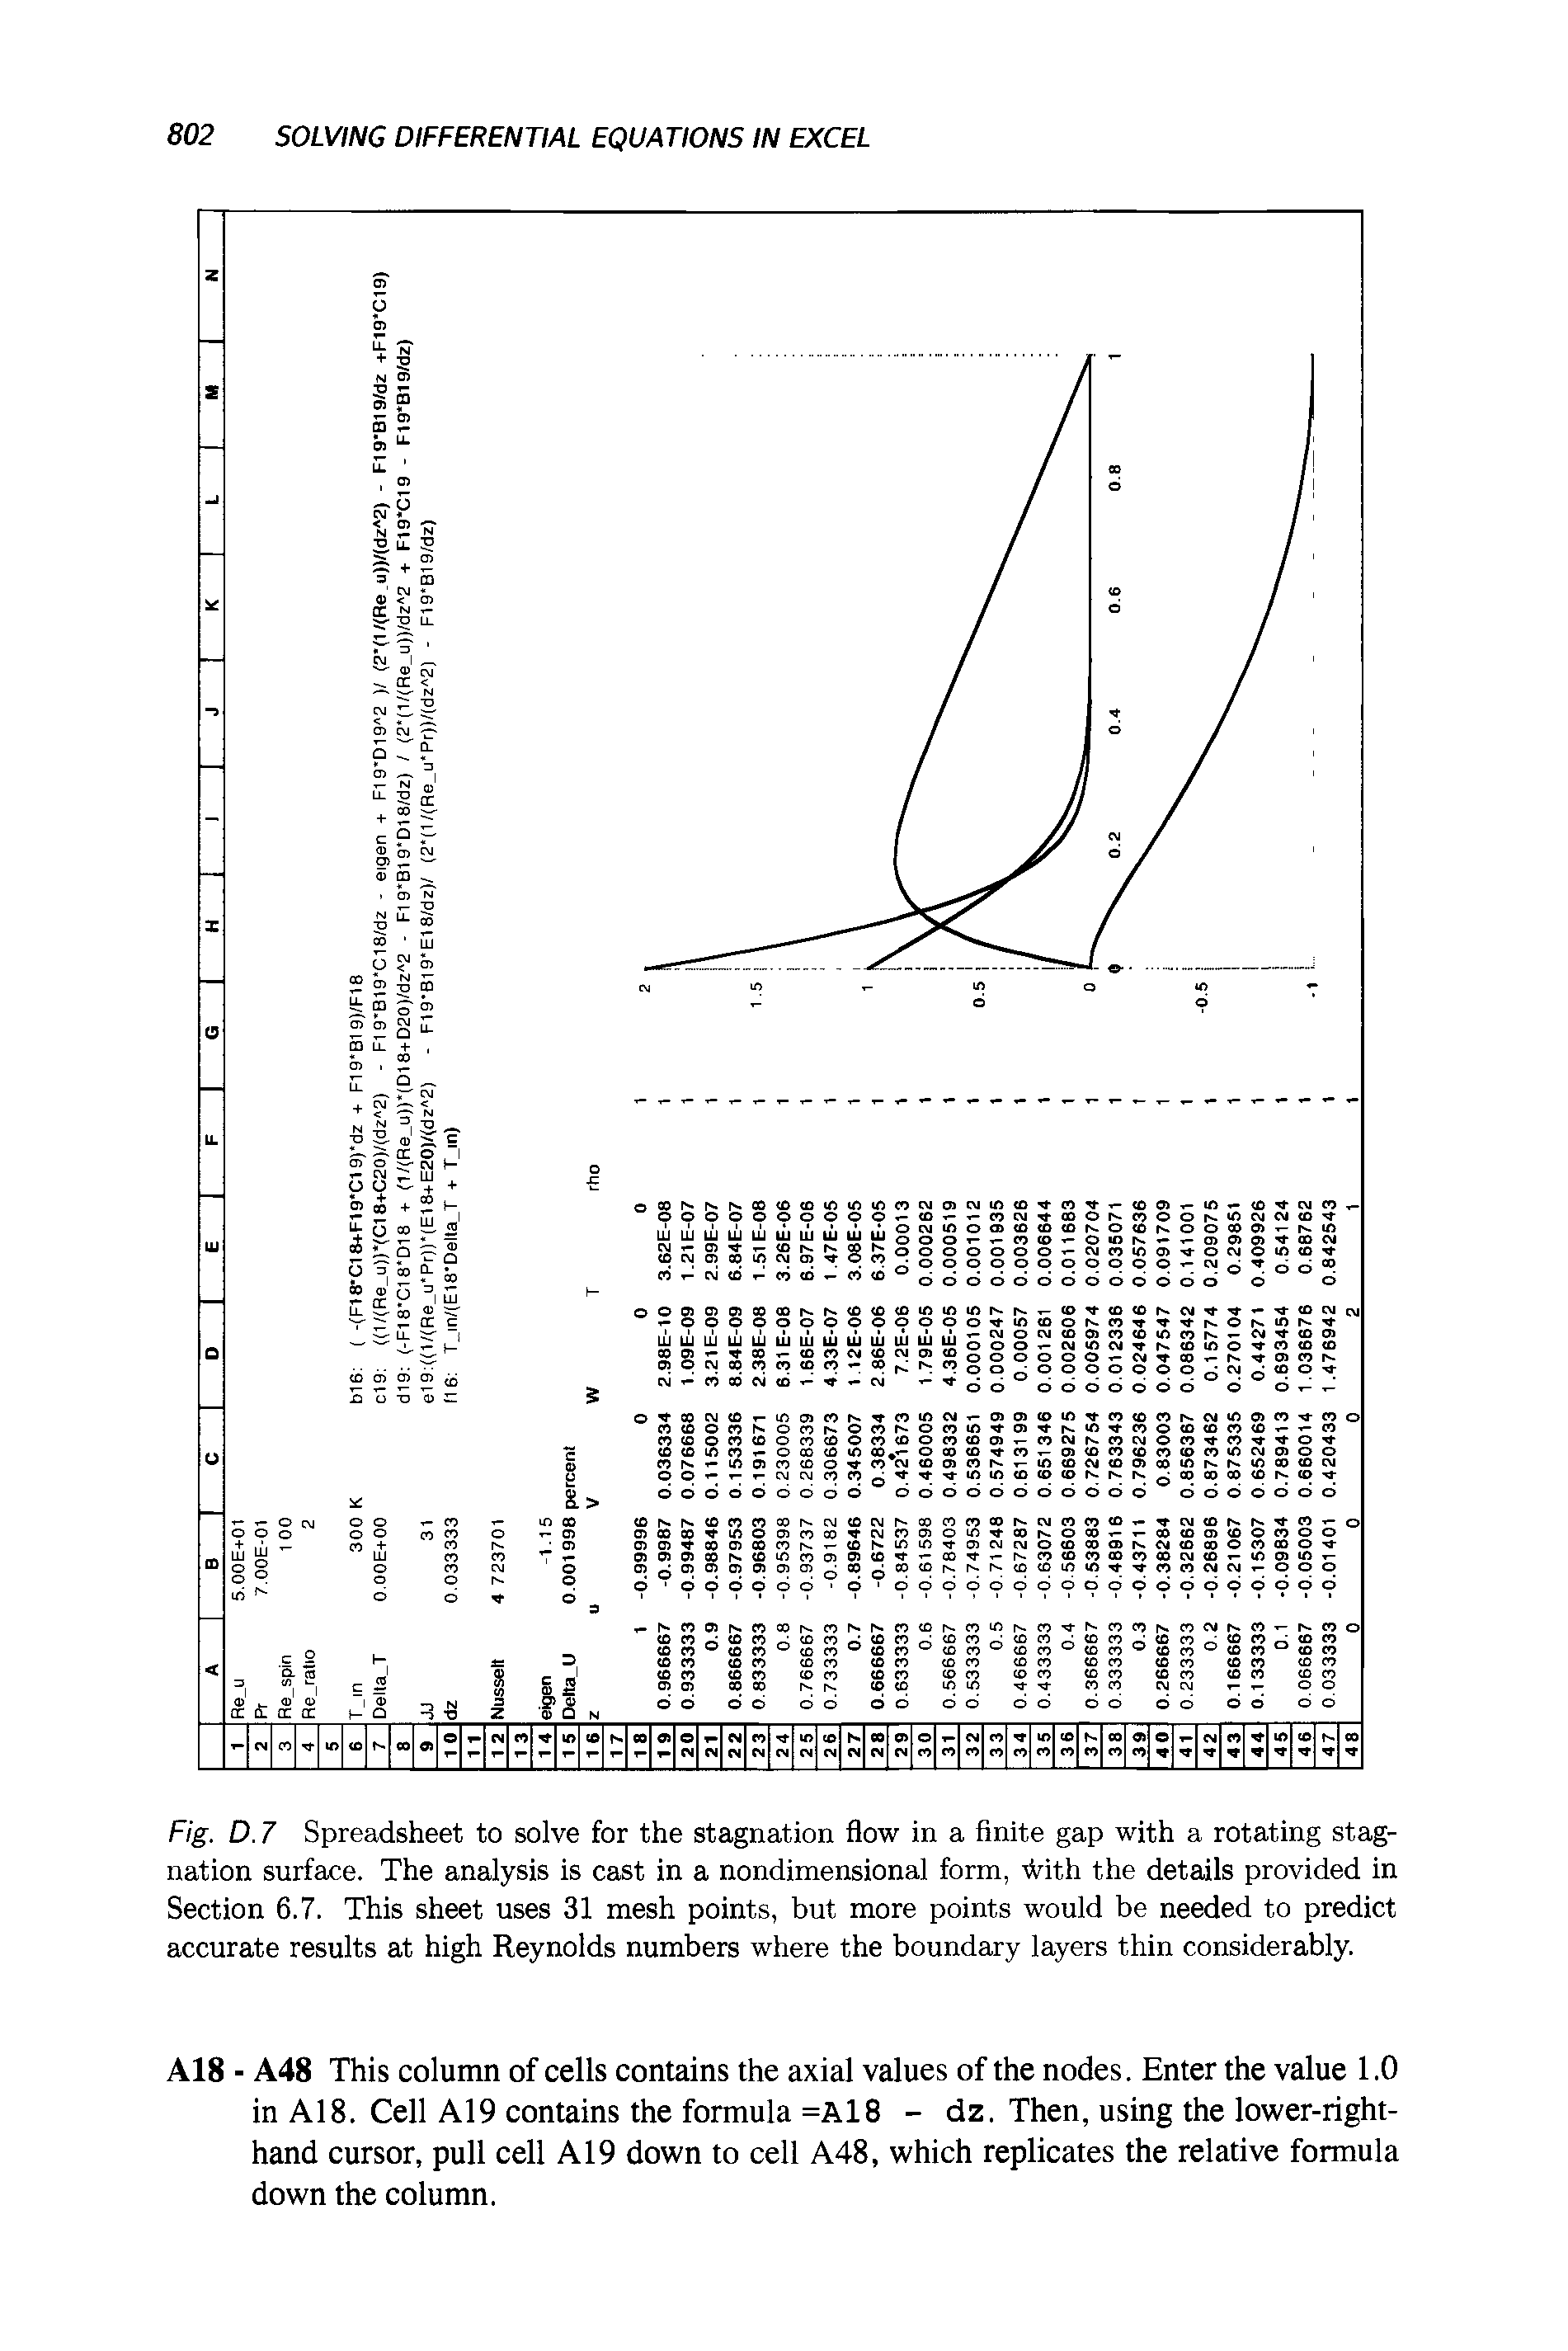 Fig. D. 7 Spreadsheet to solve for the stagnation flow in a finite gap with a rotating stagnation surface. The analysis is cast in a nondimensional form, iVith the details provided in Section 6.7. This sheet uses 31 mesh points, but more points would be needed to predict accurate results at high Reynolds numbers where the boundary layers thin considerably.